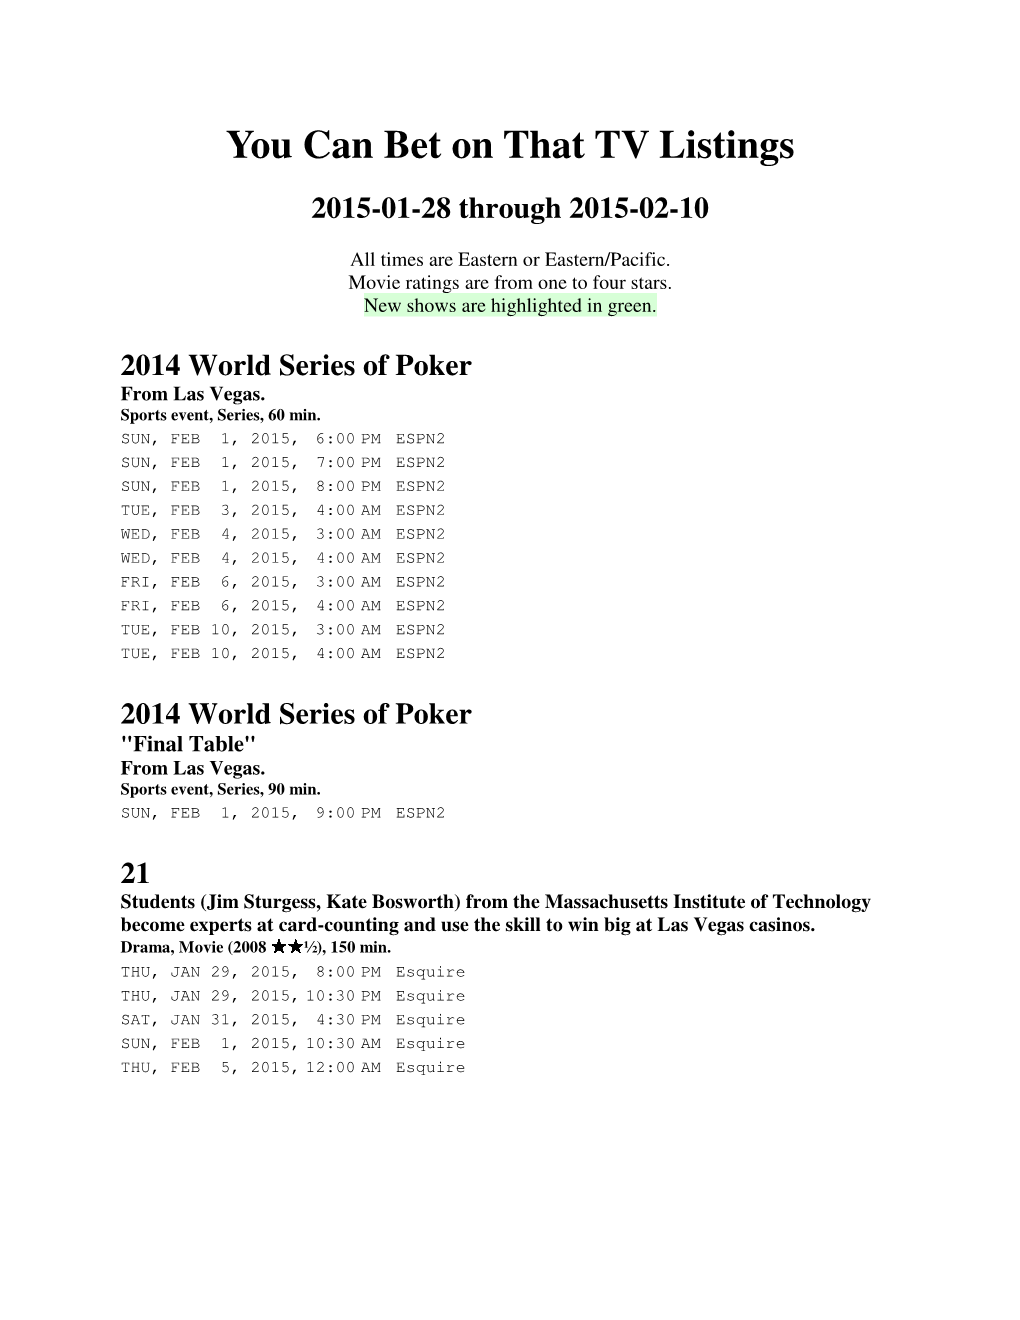 You Can Bet on That TV Listings 2015-01-28 Through 2015-02-10